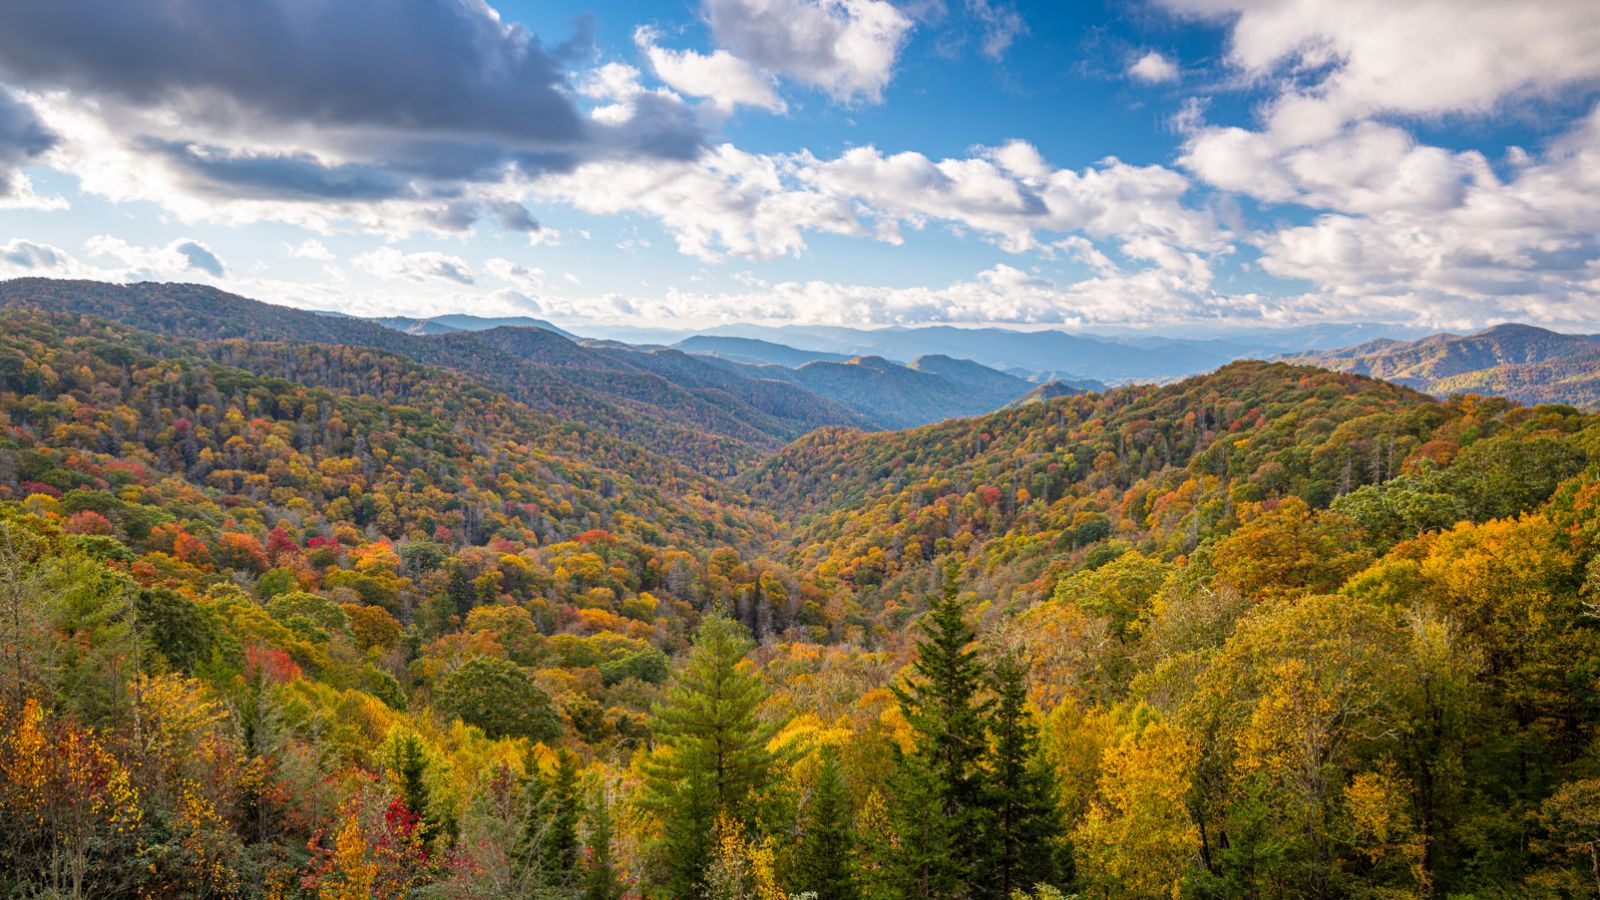 <p>This southeastern national park on the ridgeline of the Great Smoky Mountains contains some 16 peaks over 1,800 meters tall and a rich biodiversity of animal and plant species. <a href="https://www.visittheusa.co.uk/experience/insiders-guide-great-smoky-mountains">Visit the USA</a> notes that the “mountains and lush forest” have “more than 211,000 hectares of nature explorable by car, foot and bicycle.”</p>